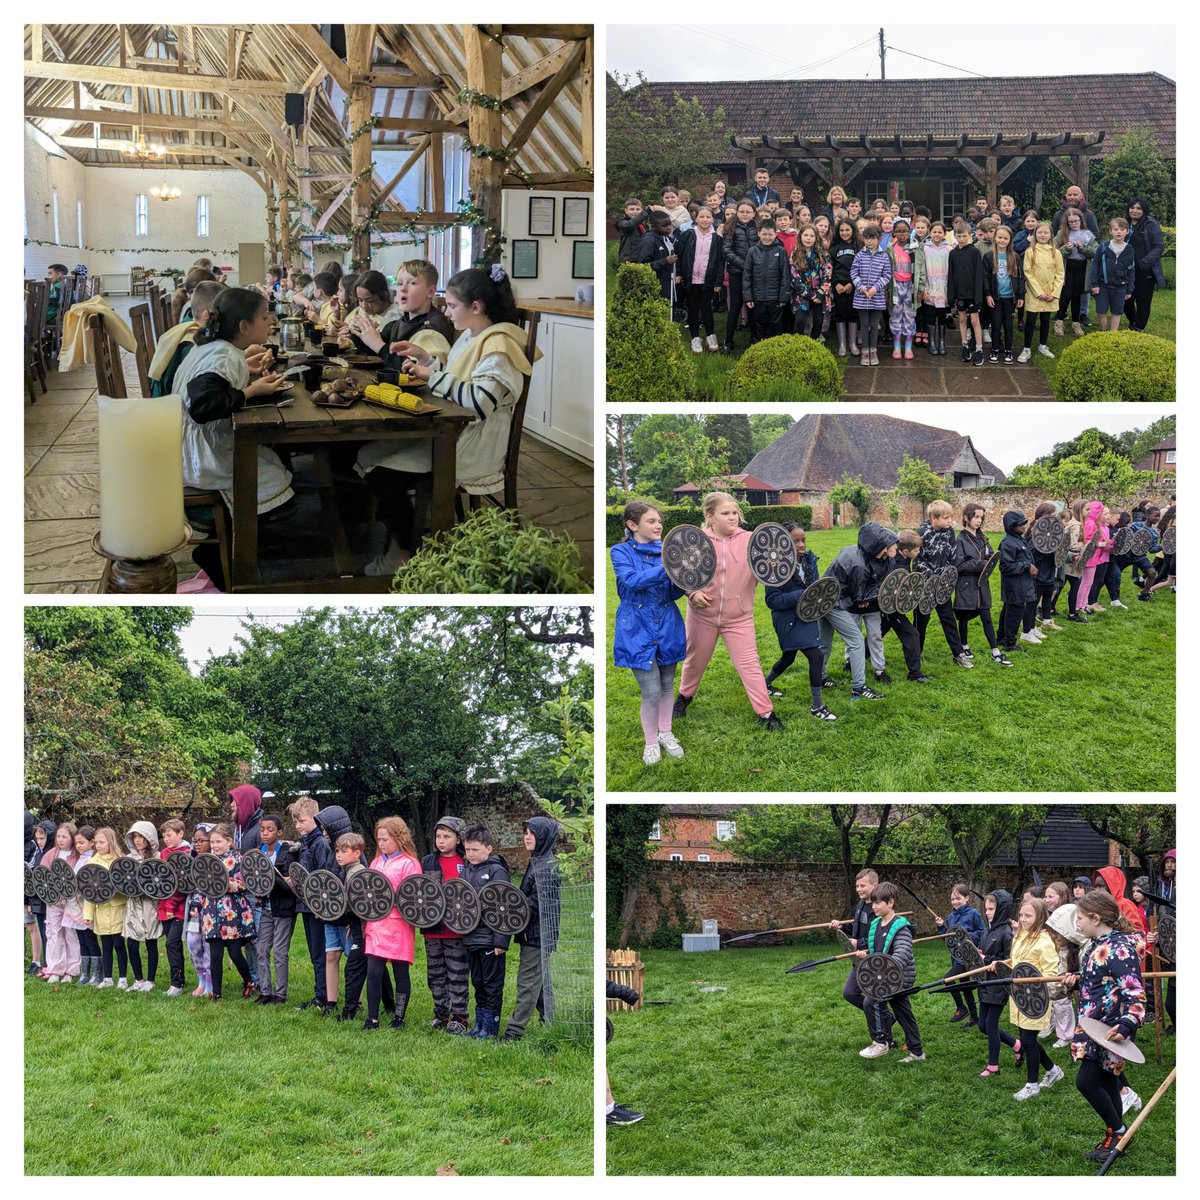 Our Year 5s have had a great time with St Michael's Primary immersed in Ancient Greece! Battles and banquets! #TrustCollaboration #ExperientialLearning